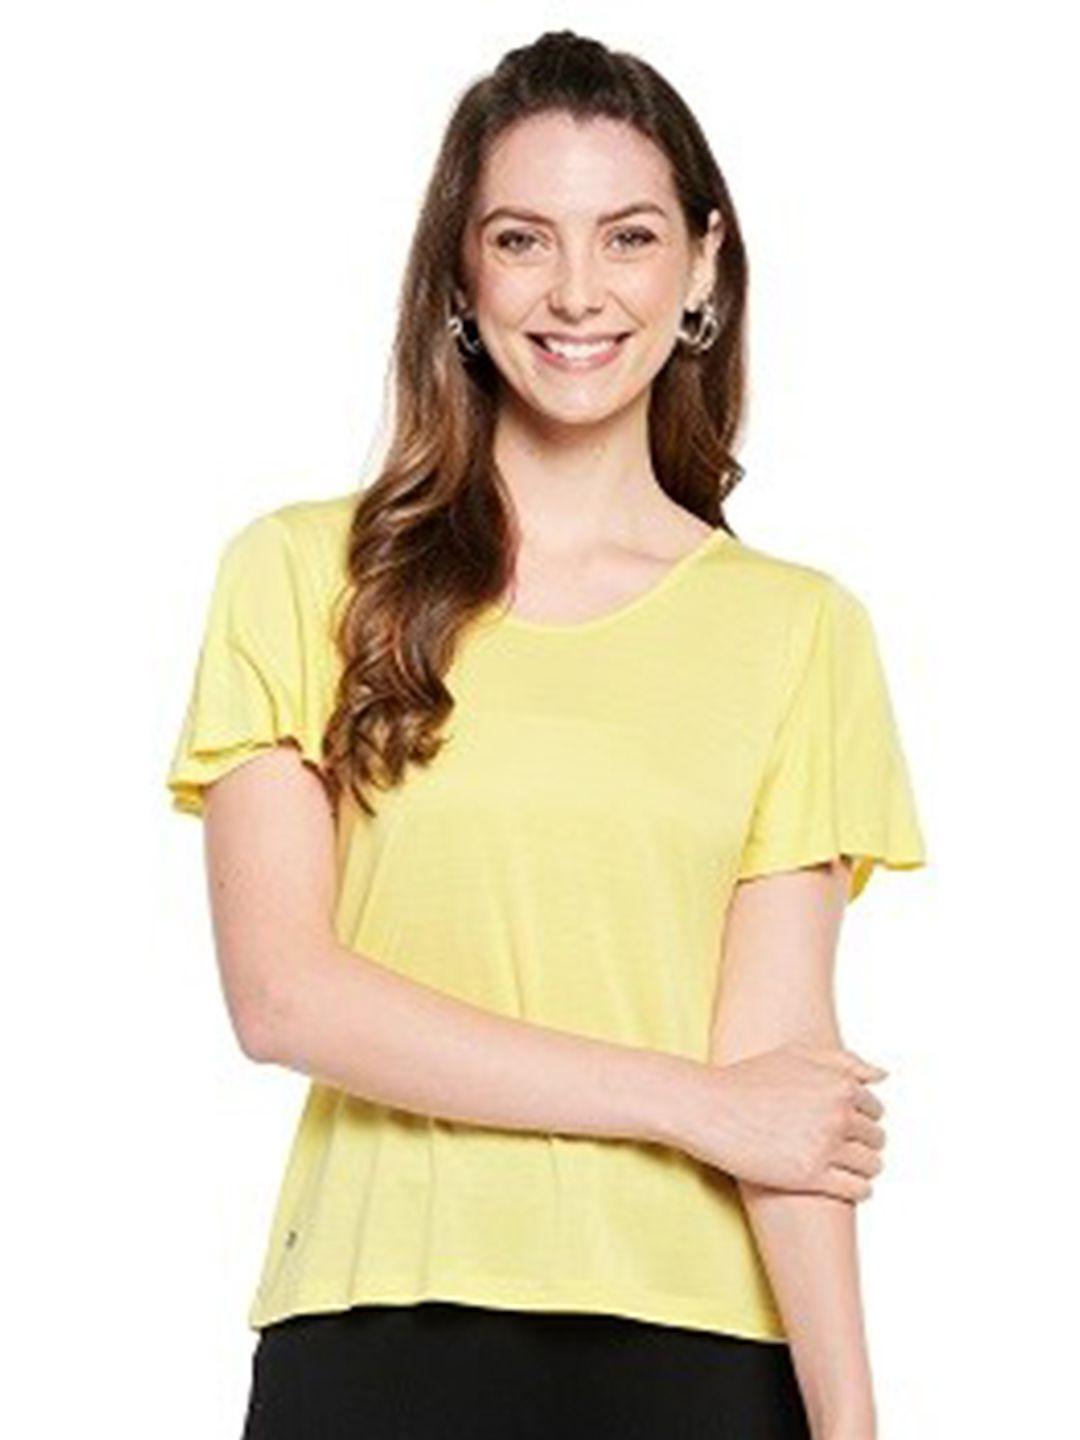 unmade-woman-yellow-top